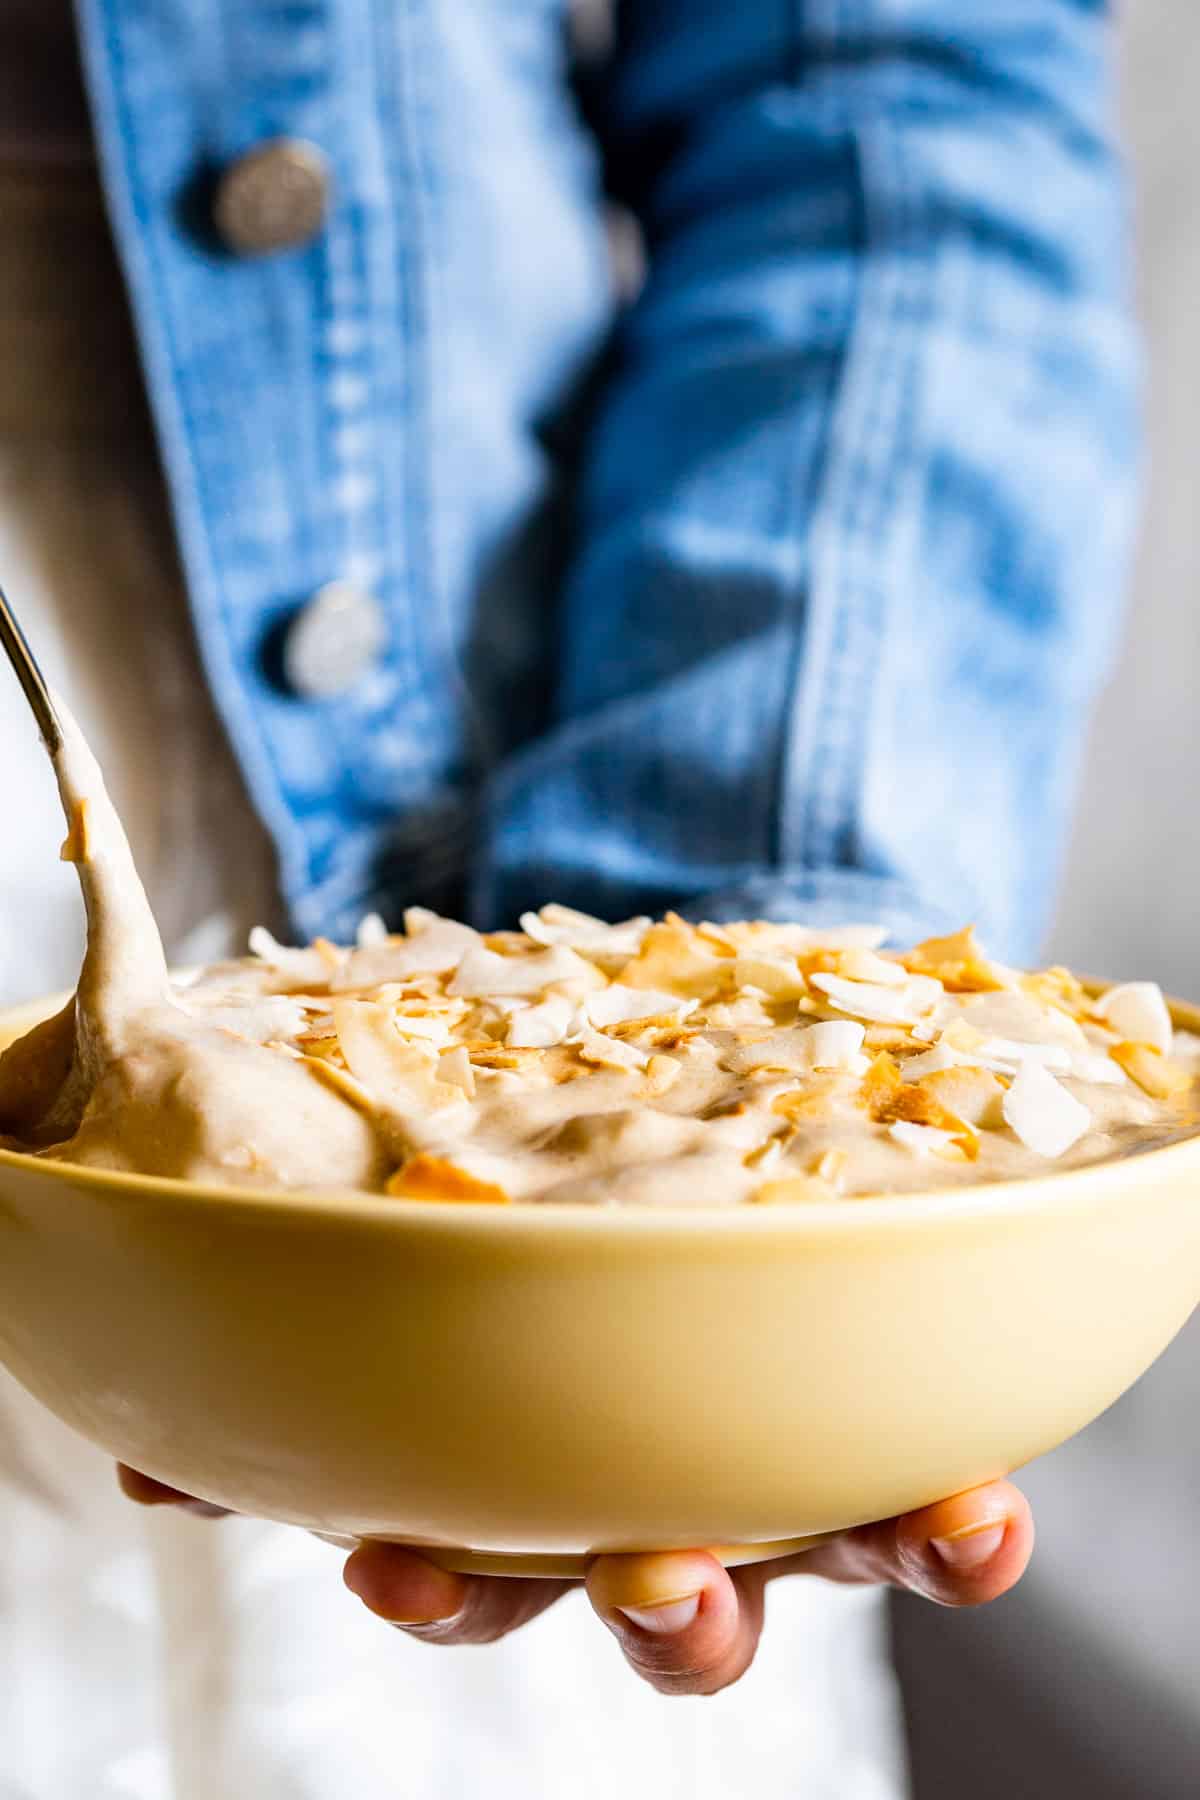 A close view of the Coconut Banana Nice Cream topped with toasted coconut with a gold spoon scooping some out.